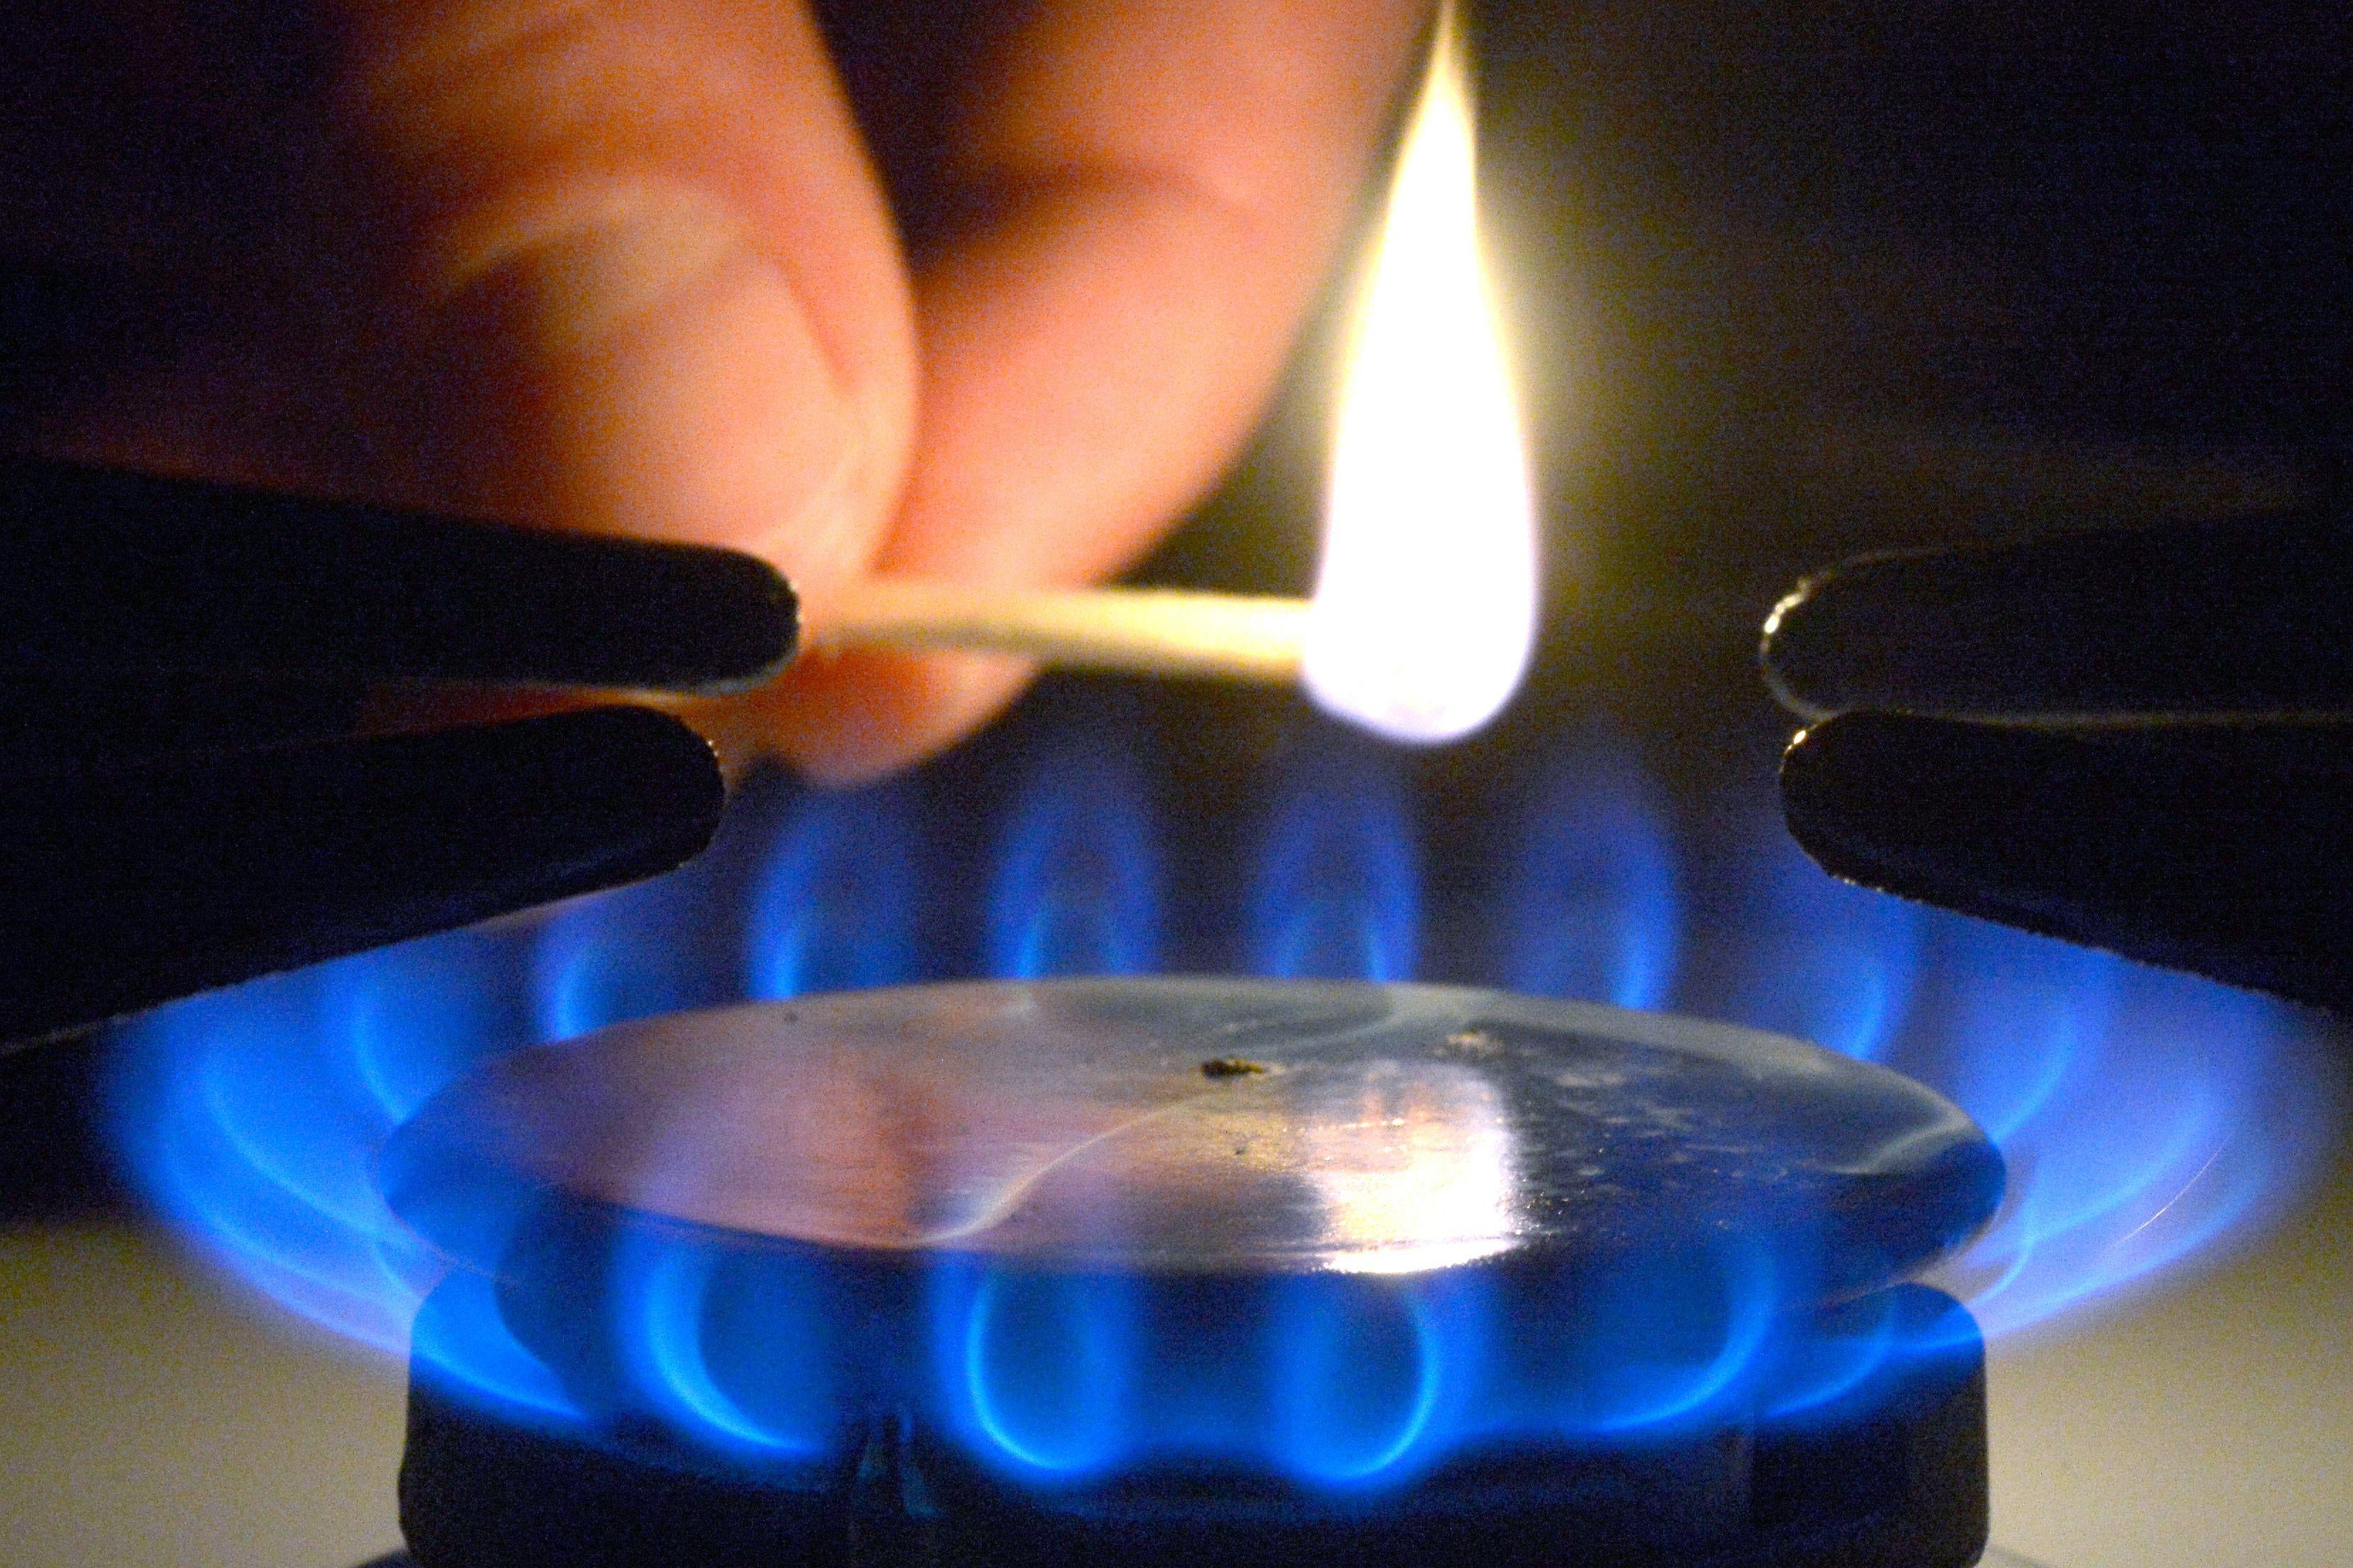 A hand is seen lighting a gas stove with a lit match.